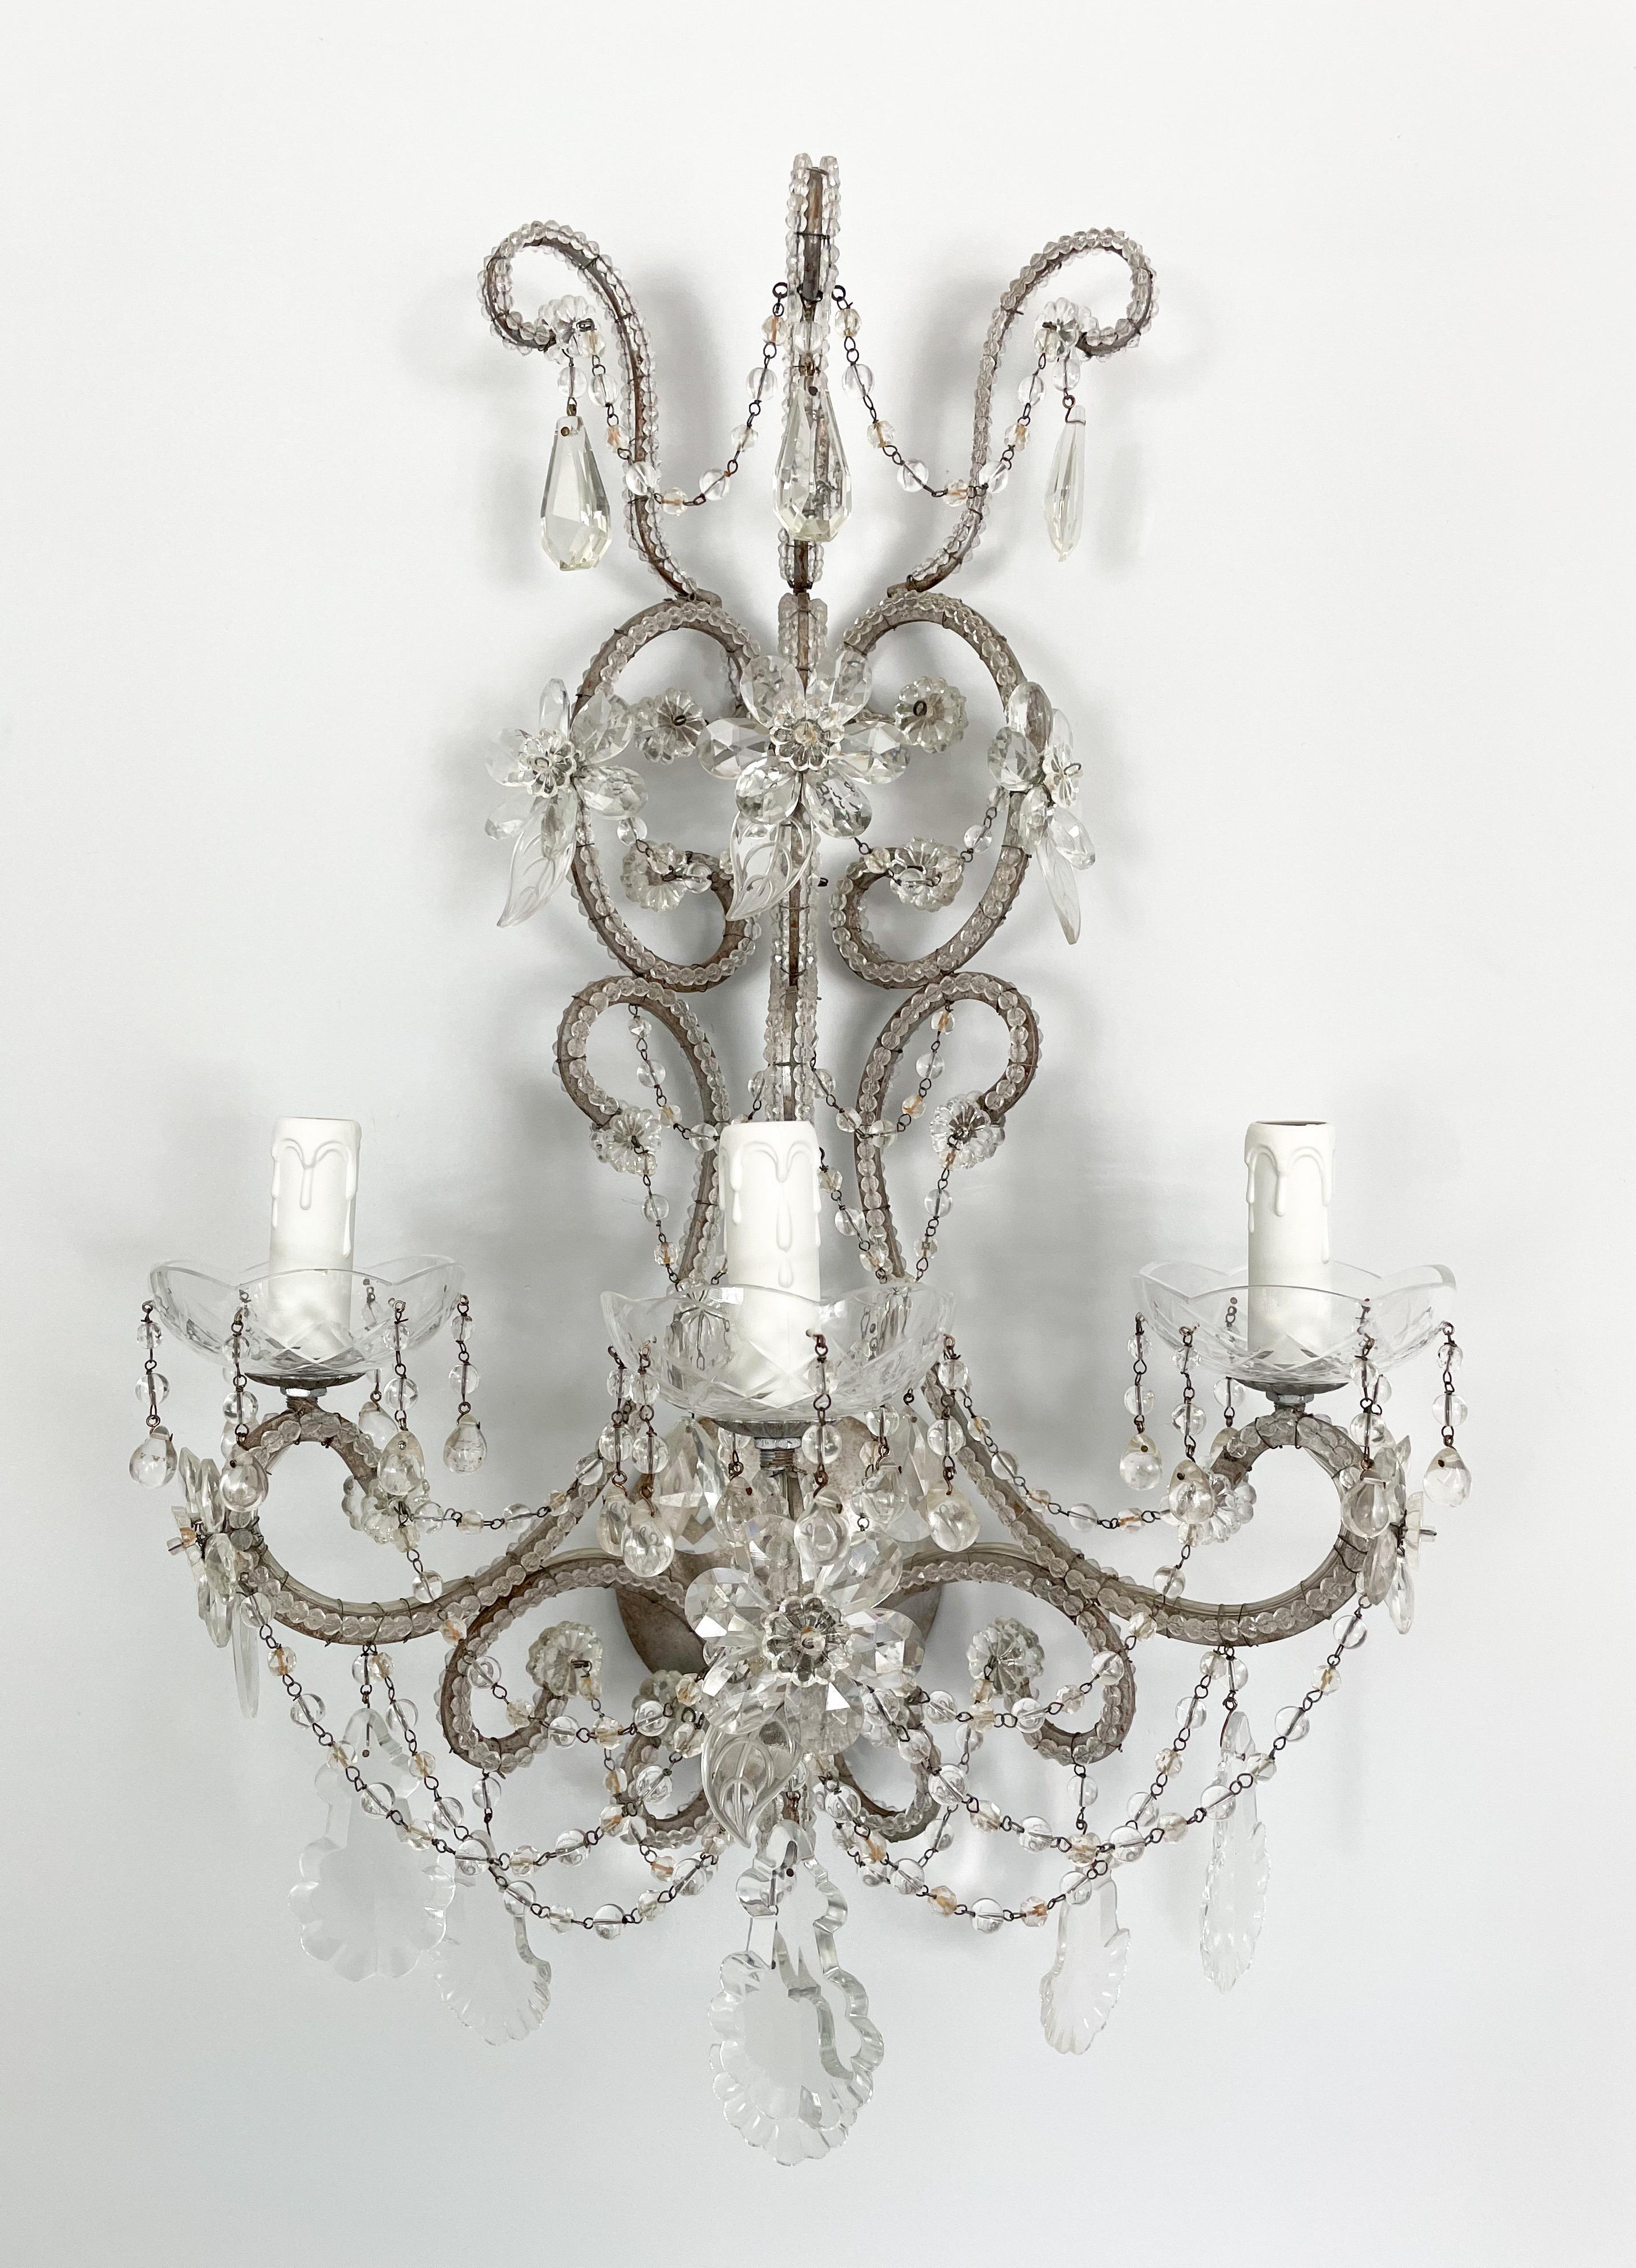 Glorious, pair of Italian crystal beaded sconces in the style of Maison Bagués. 

Each sconce consists of a scrolled silvered-iron frame outlined with “English cut” beads. Flowers and leaves made of cut glass along with French pendants complete